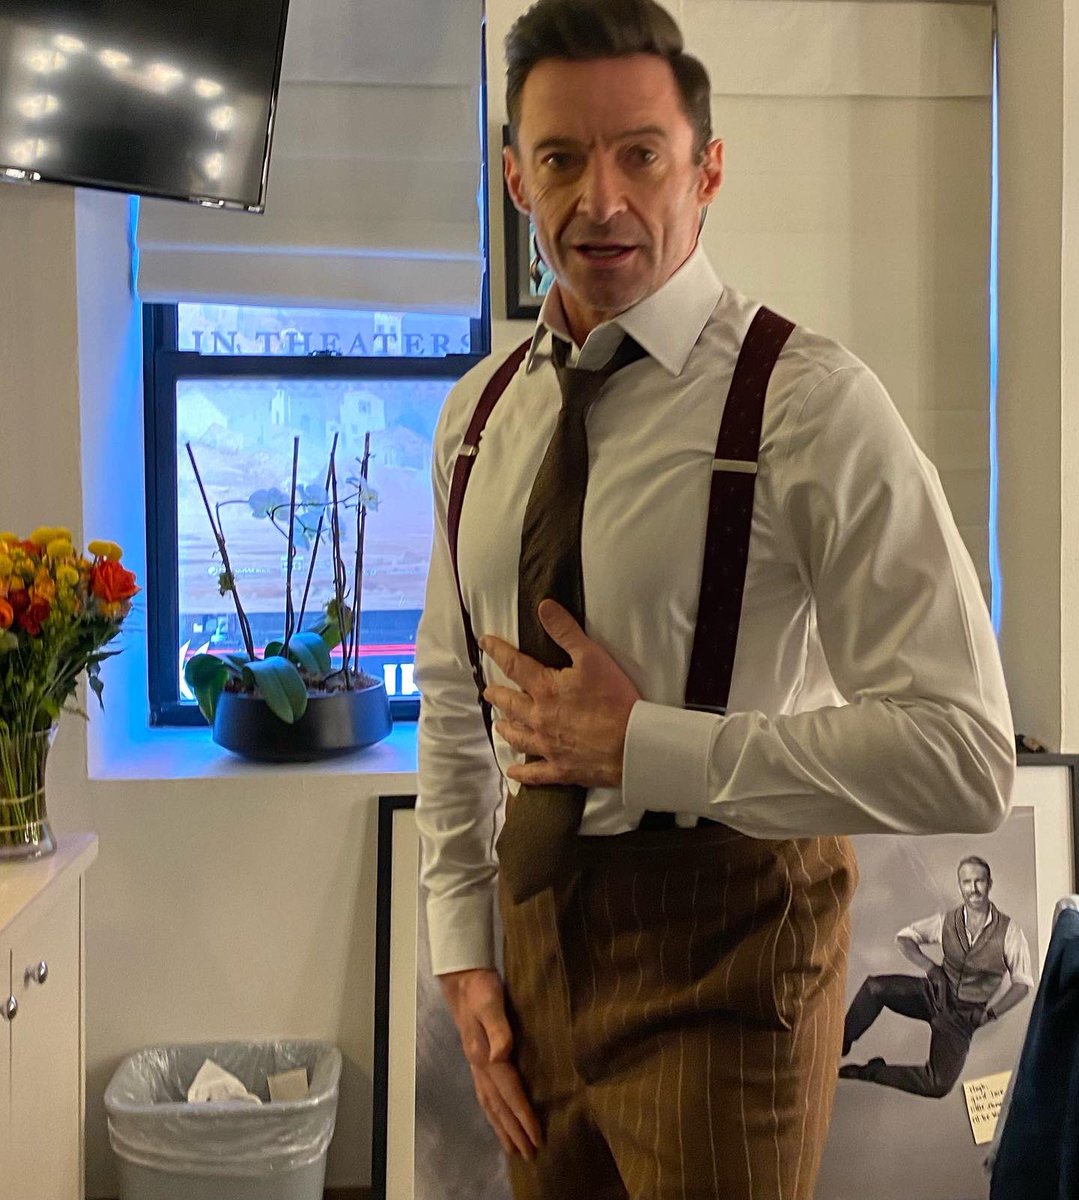 Hugh Jackman On Twitter 17 More Sleeps Until Another Actor Stands Here Musicmanbway